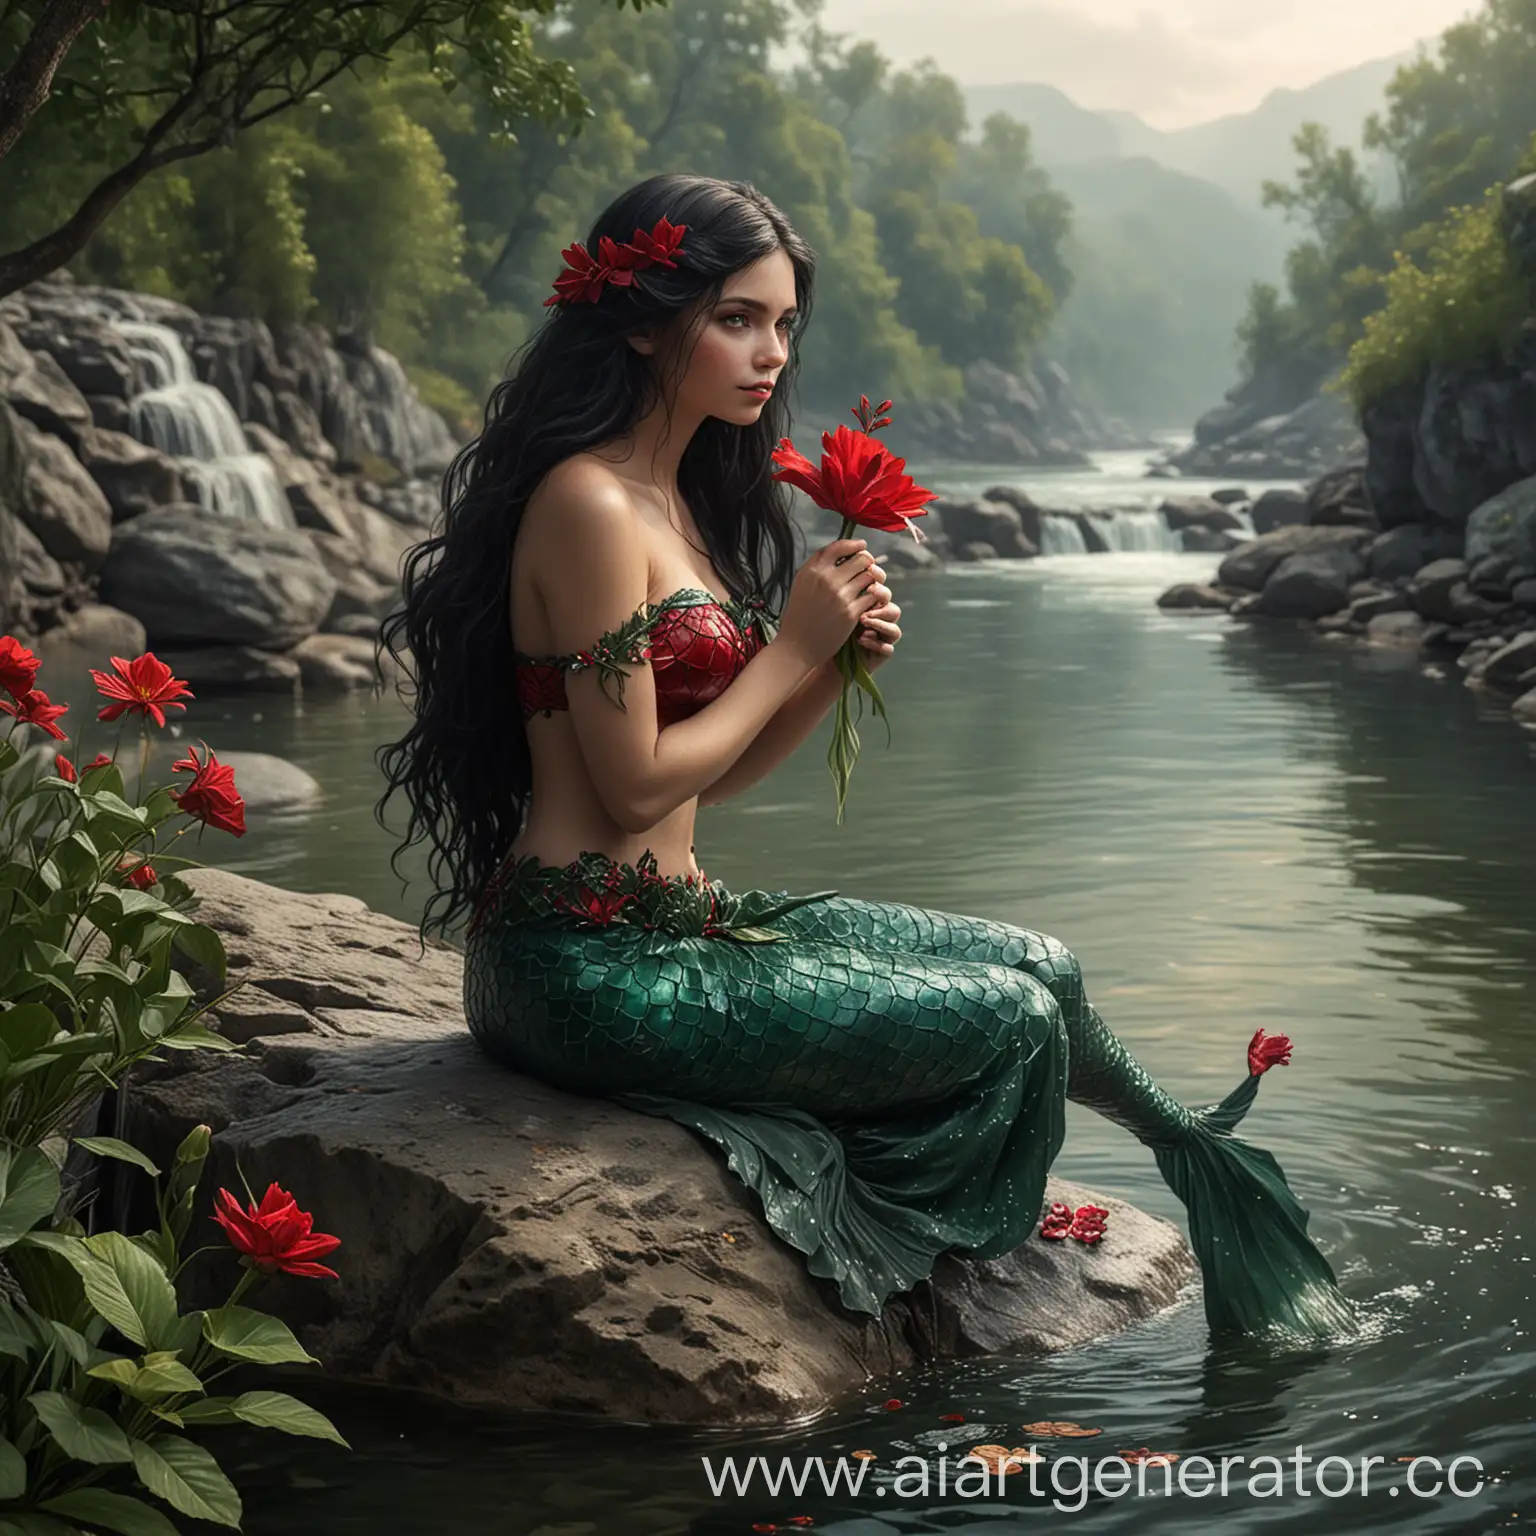 DarkHaired-Mermaid-Sitting-on-River-Rock-with-Red-Flower